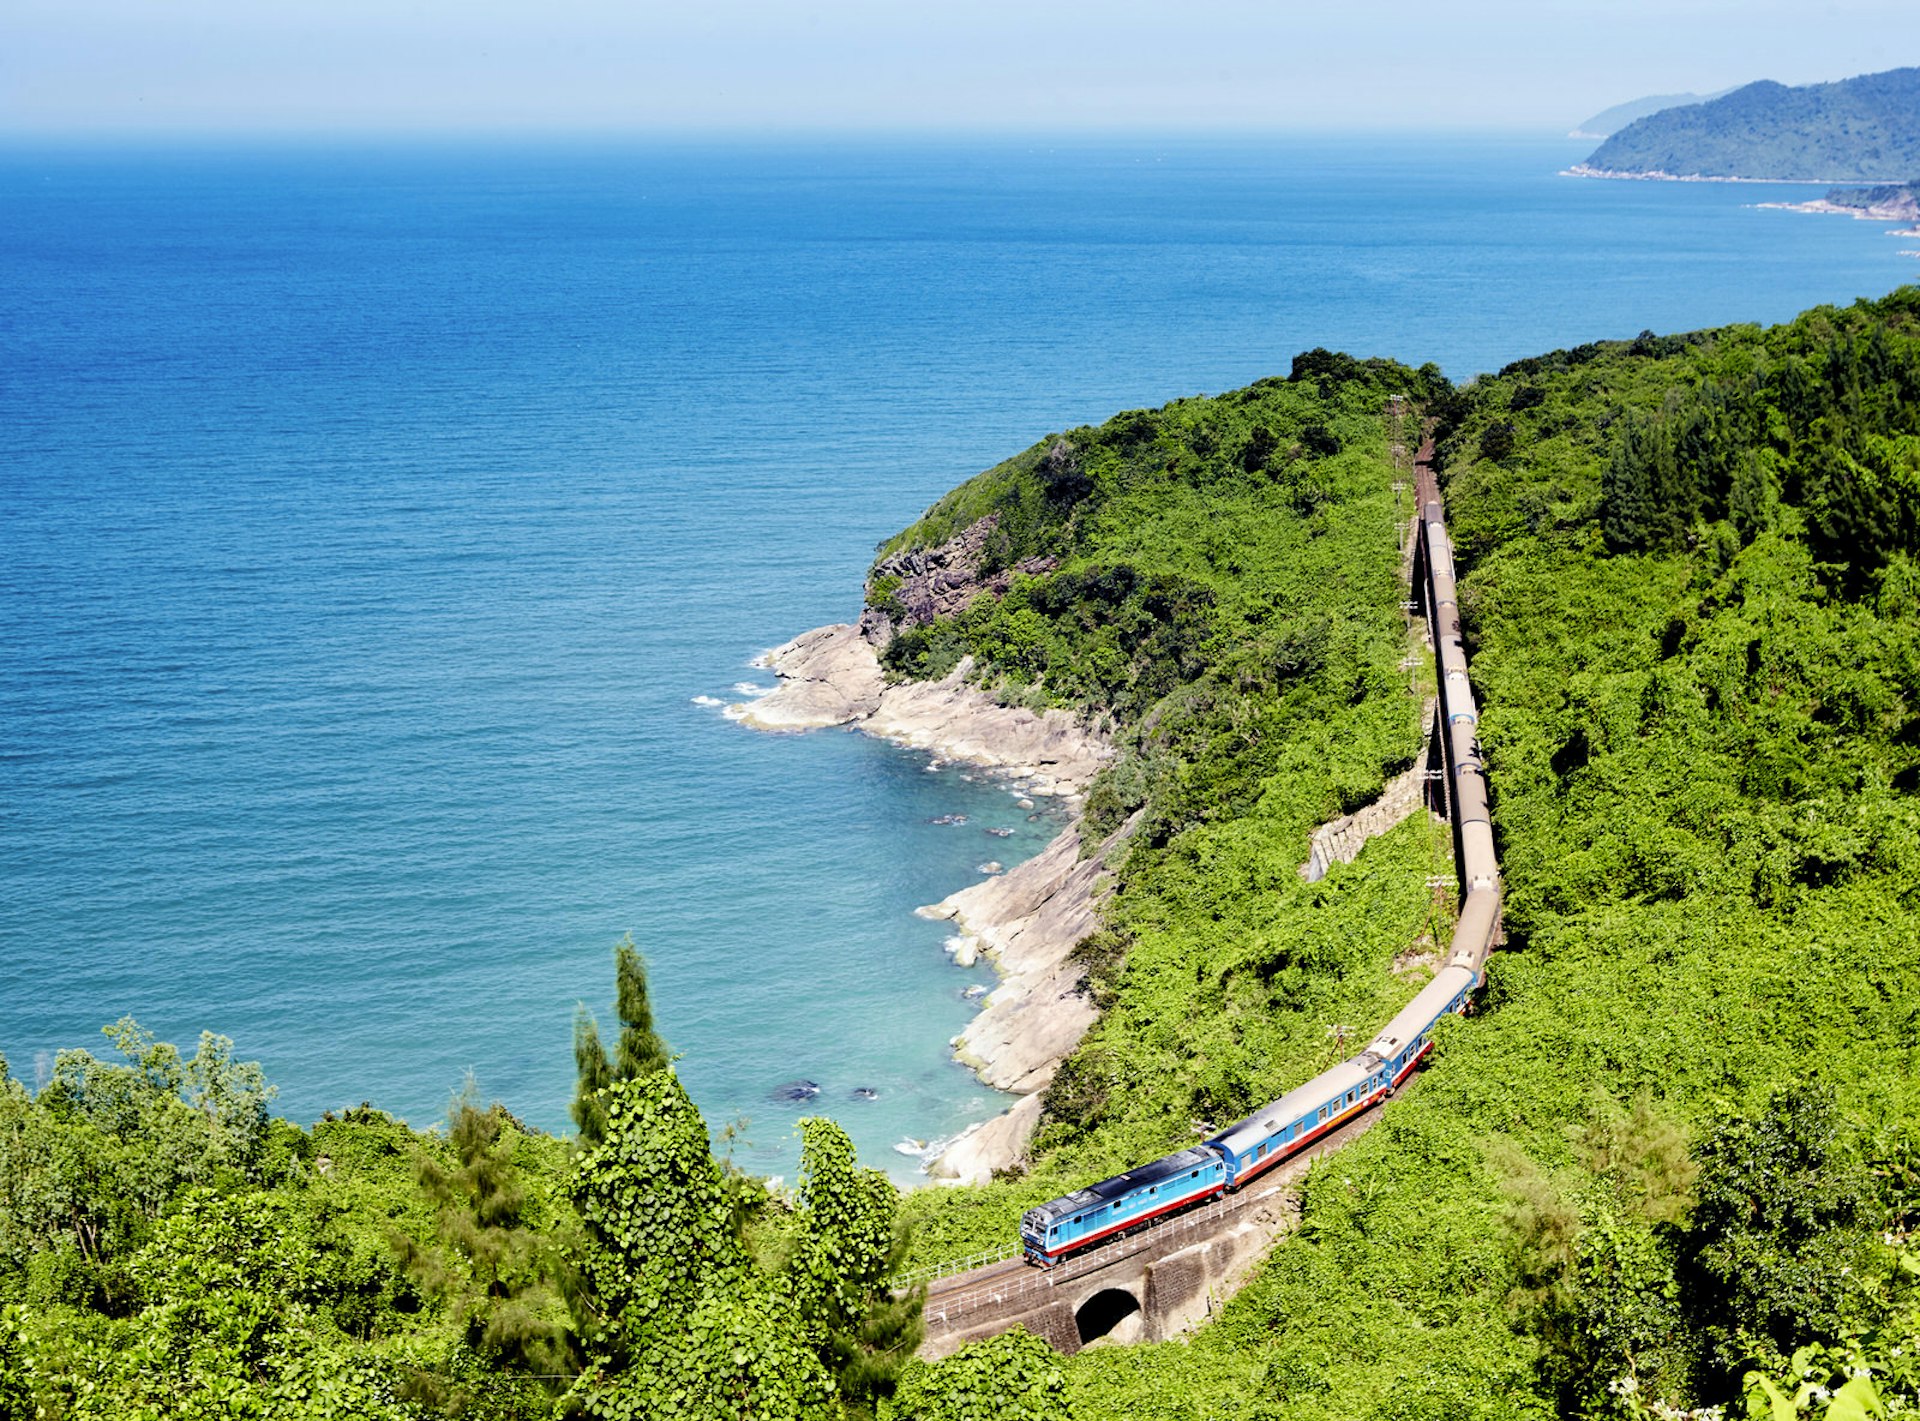 The Reunification Express running alongside the South China Sea between Hue and Hoi An © Matt Munro / Lonely Planet